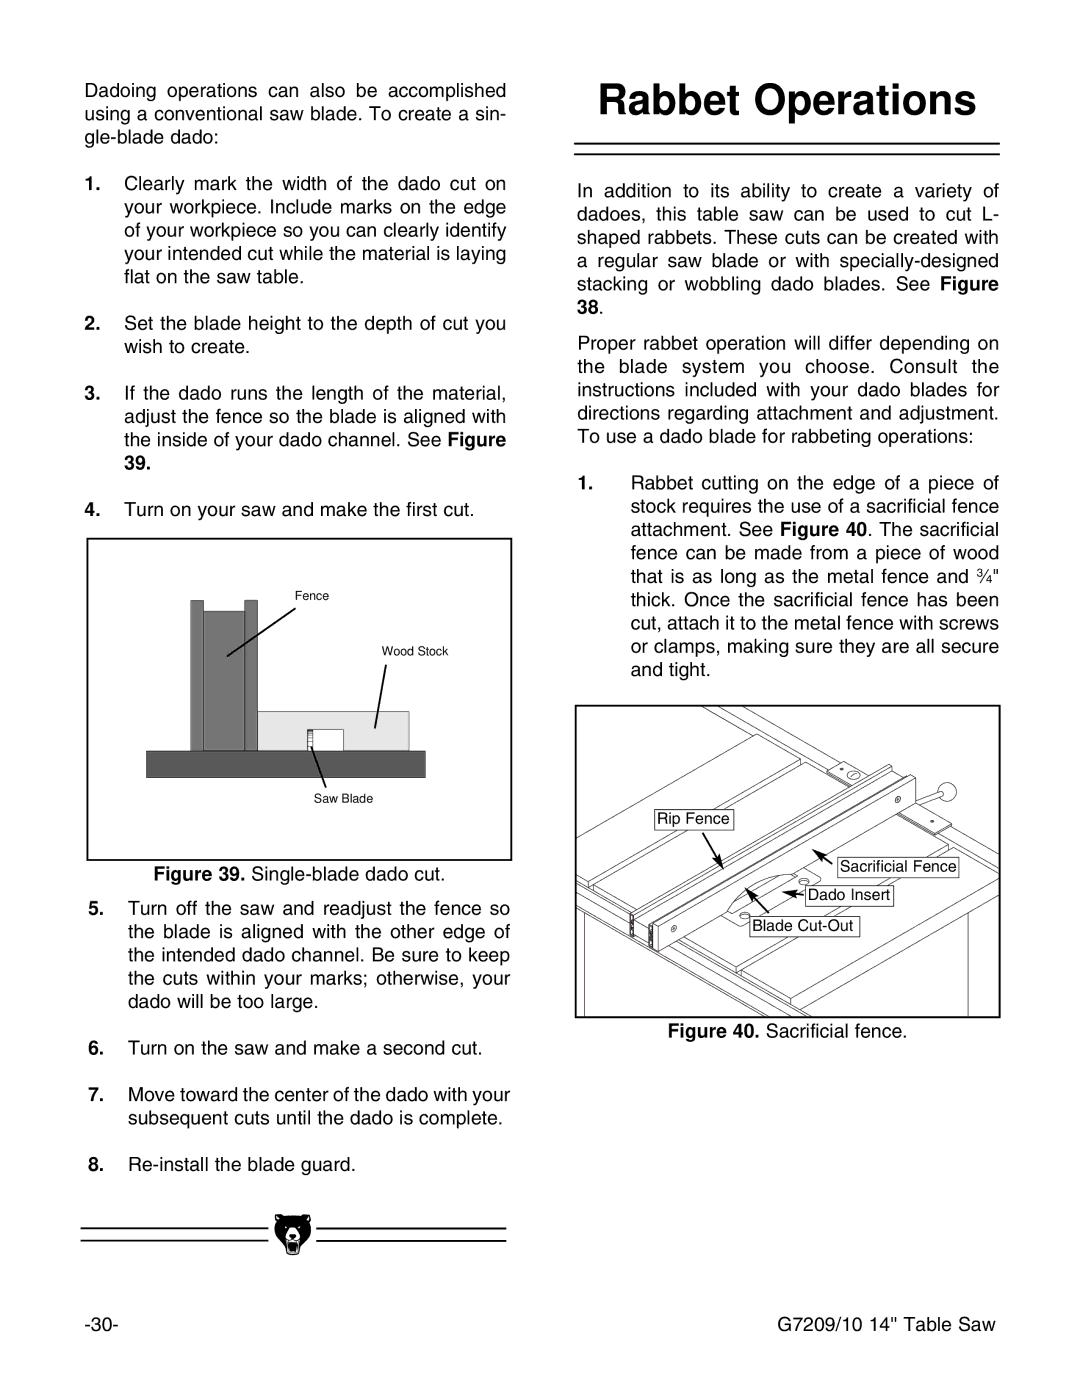 Grizzly G7209 instruction manual Rabbet Operations, Sacrificial fence 